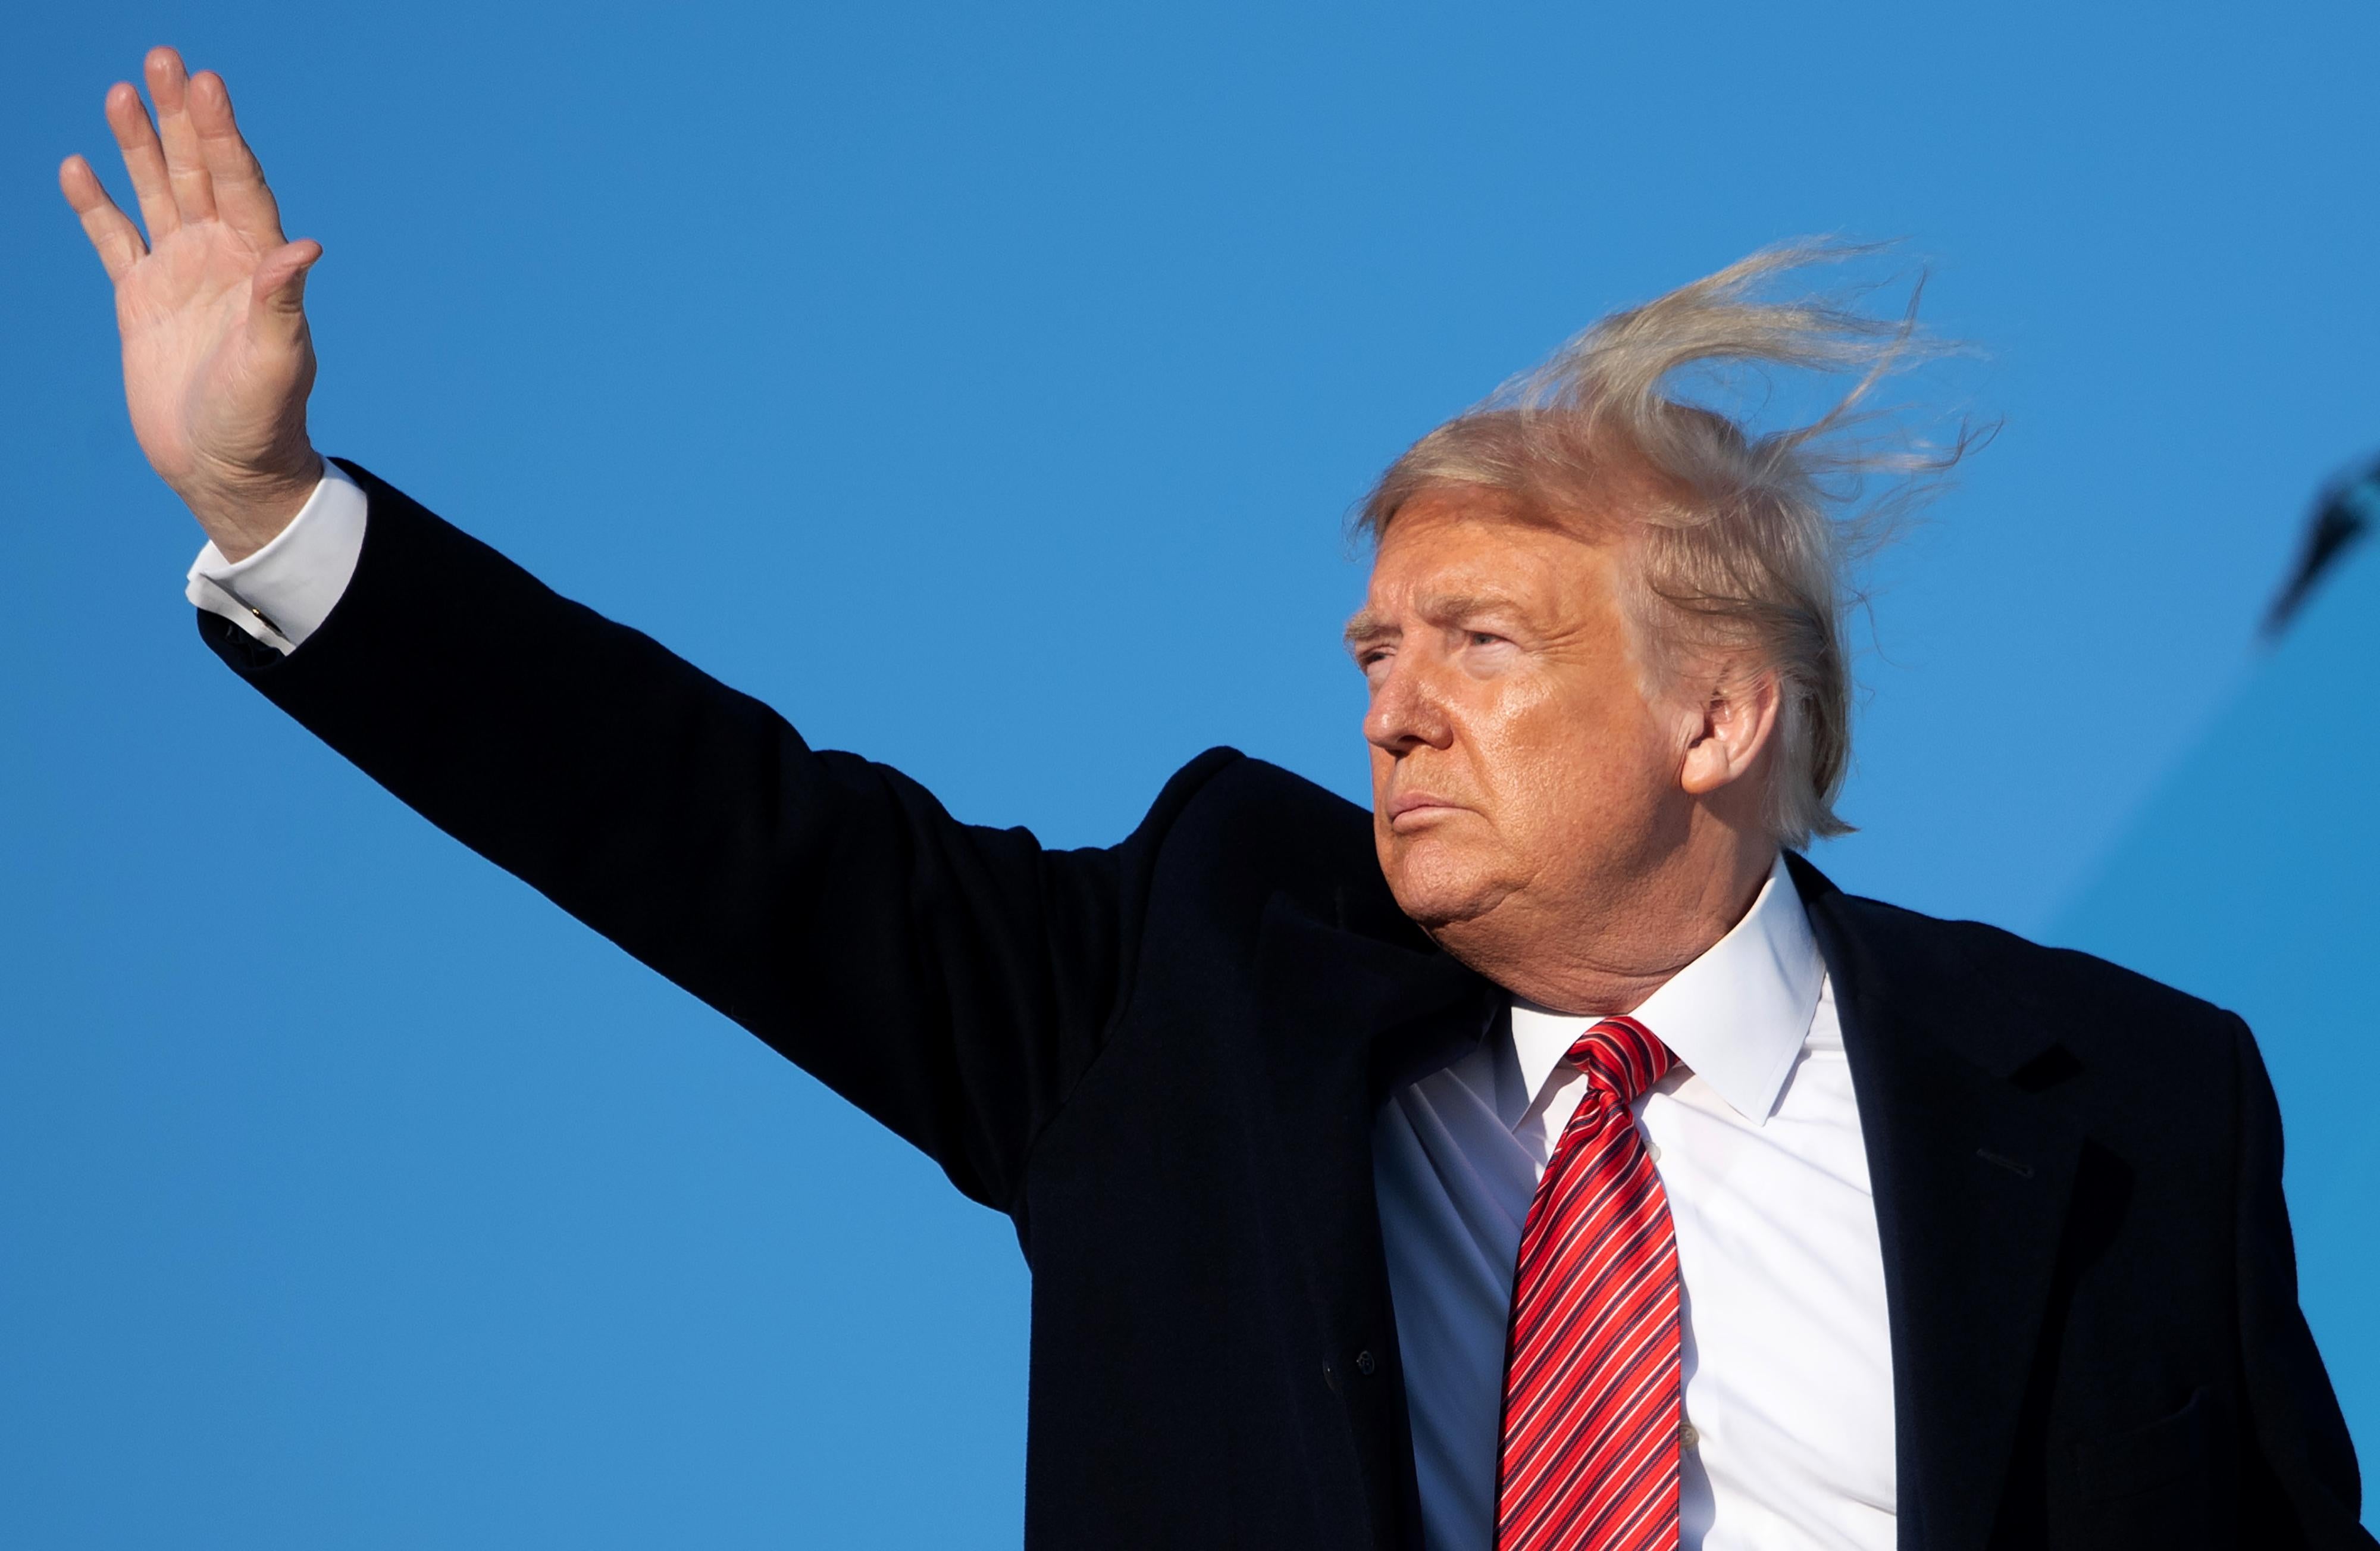 Trump's hair, such as it is, blowing wildly out of control in the wind.